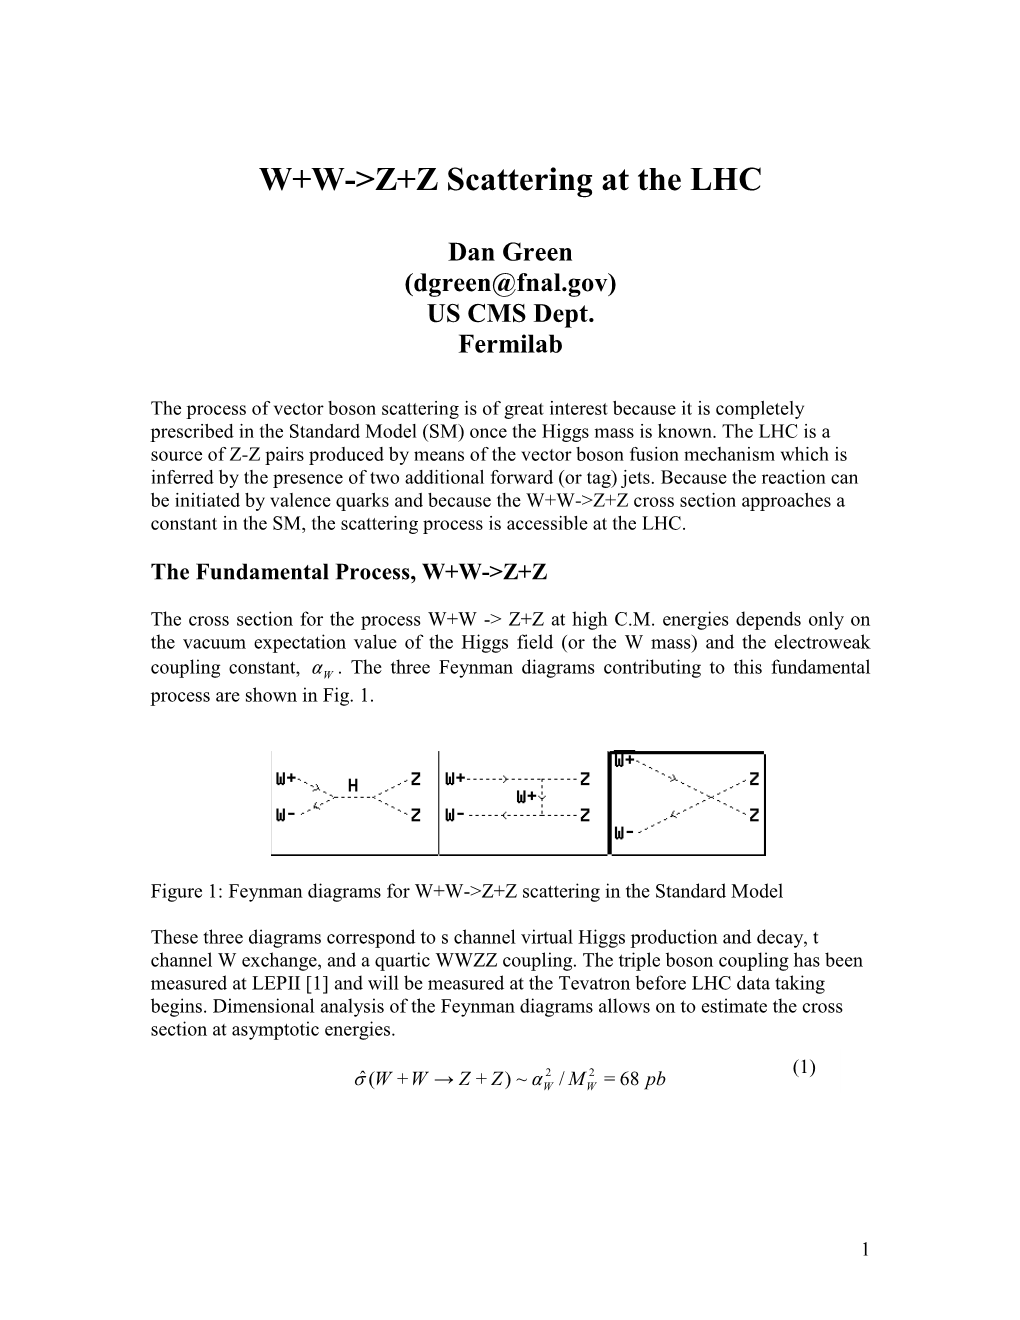 W+W-&gt;Z+Z Scattering at The